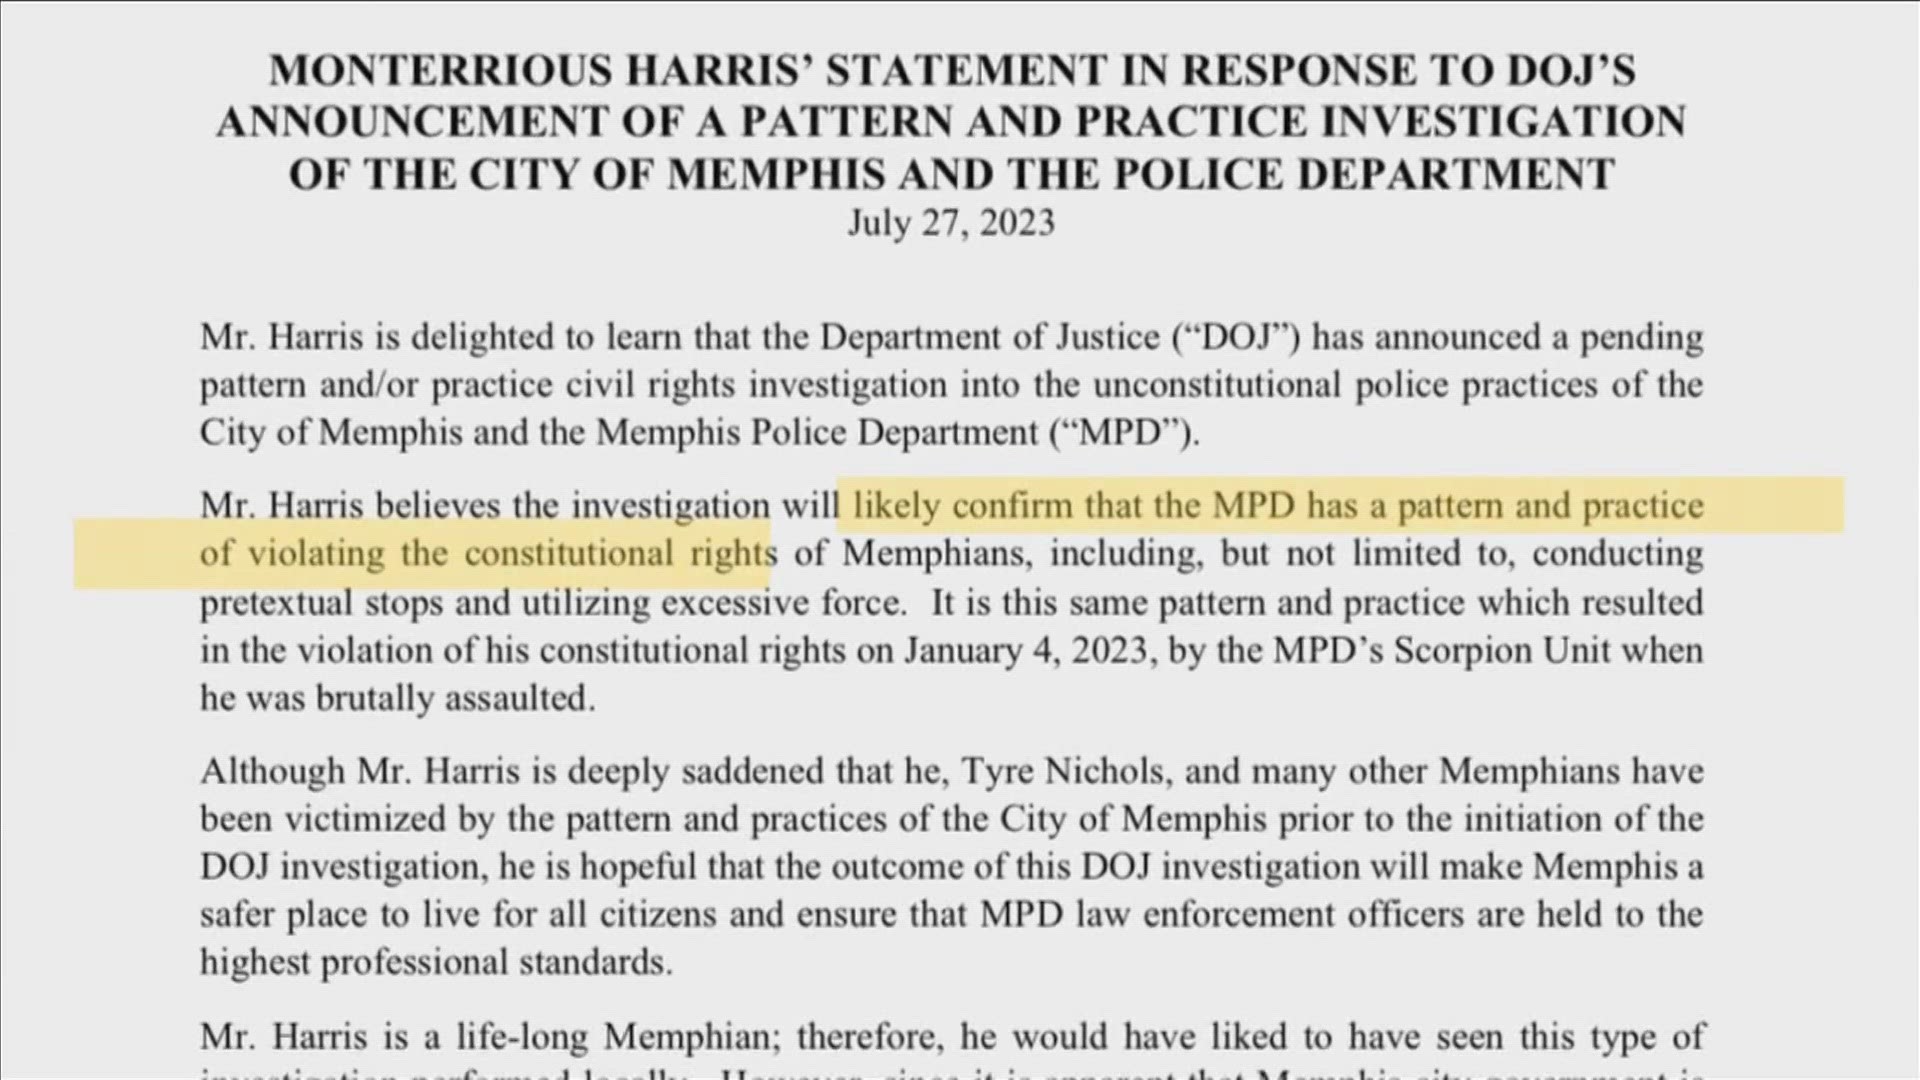 Attorneys for Monterrious Harris said they believe the investigation will "likely confirm MPD has a pattern and practice of violating constitutional rights."